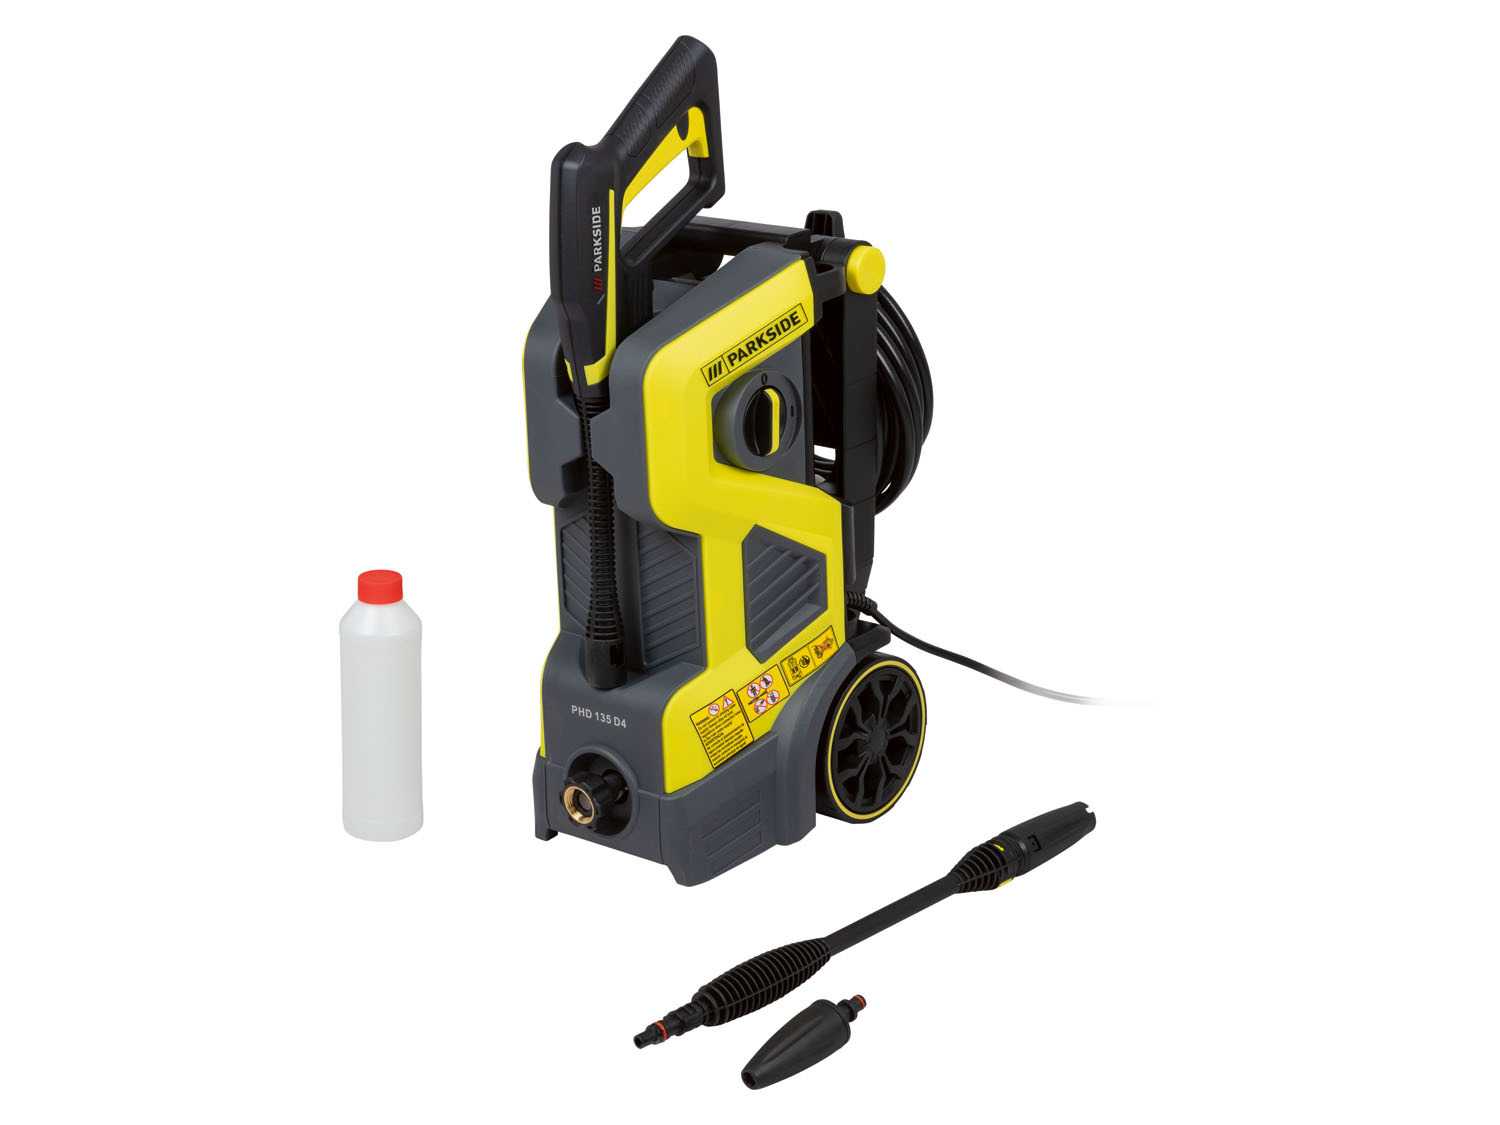 PARKSIDE® Pressure Washer »PHD 135 D5«, 1800 W